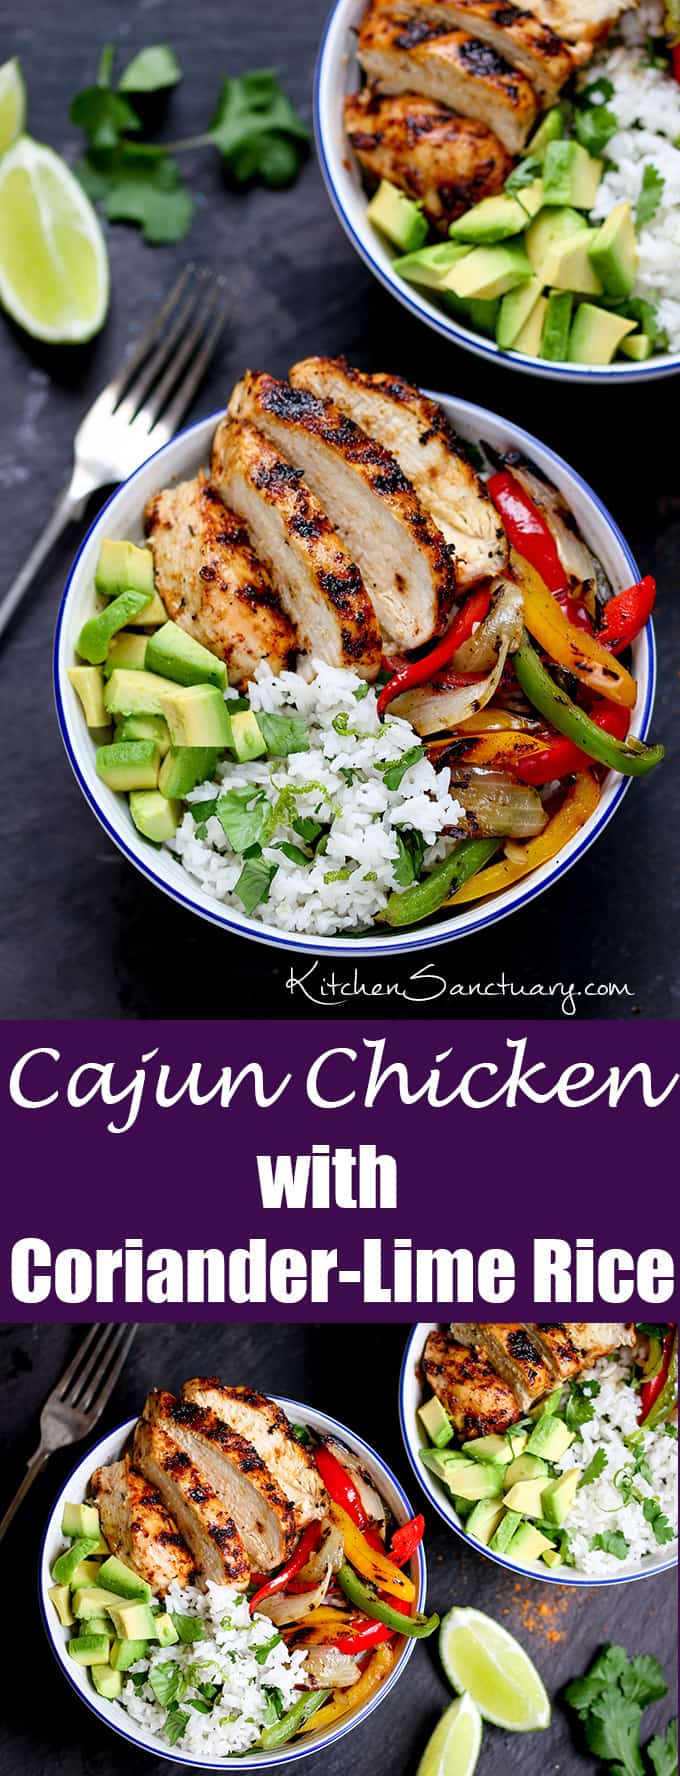 Juicy griddled Cajun chicken with charred veggies and coriander-lime rice – ready in 30 minutes. A great weeknight dinner!